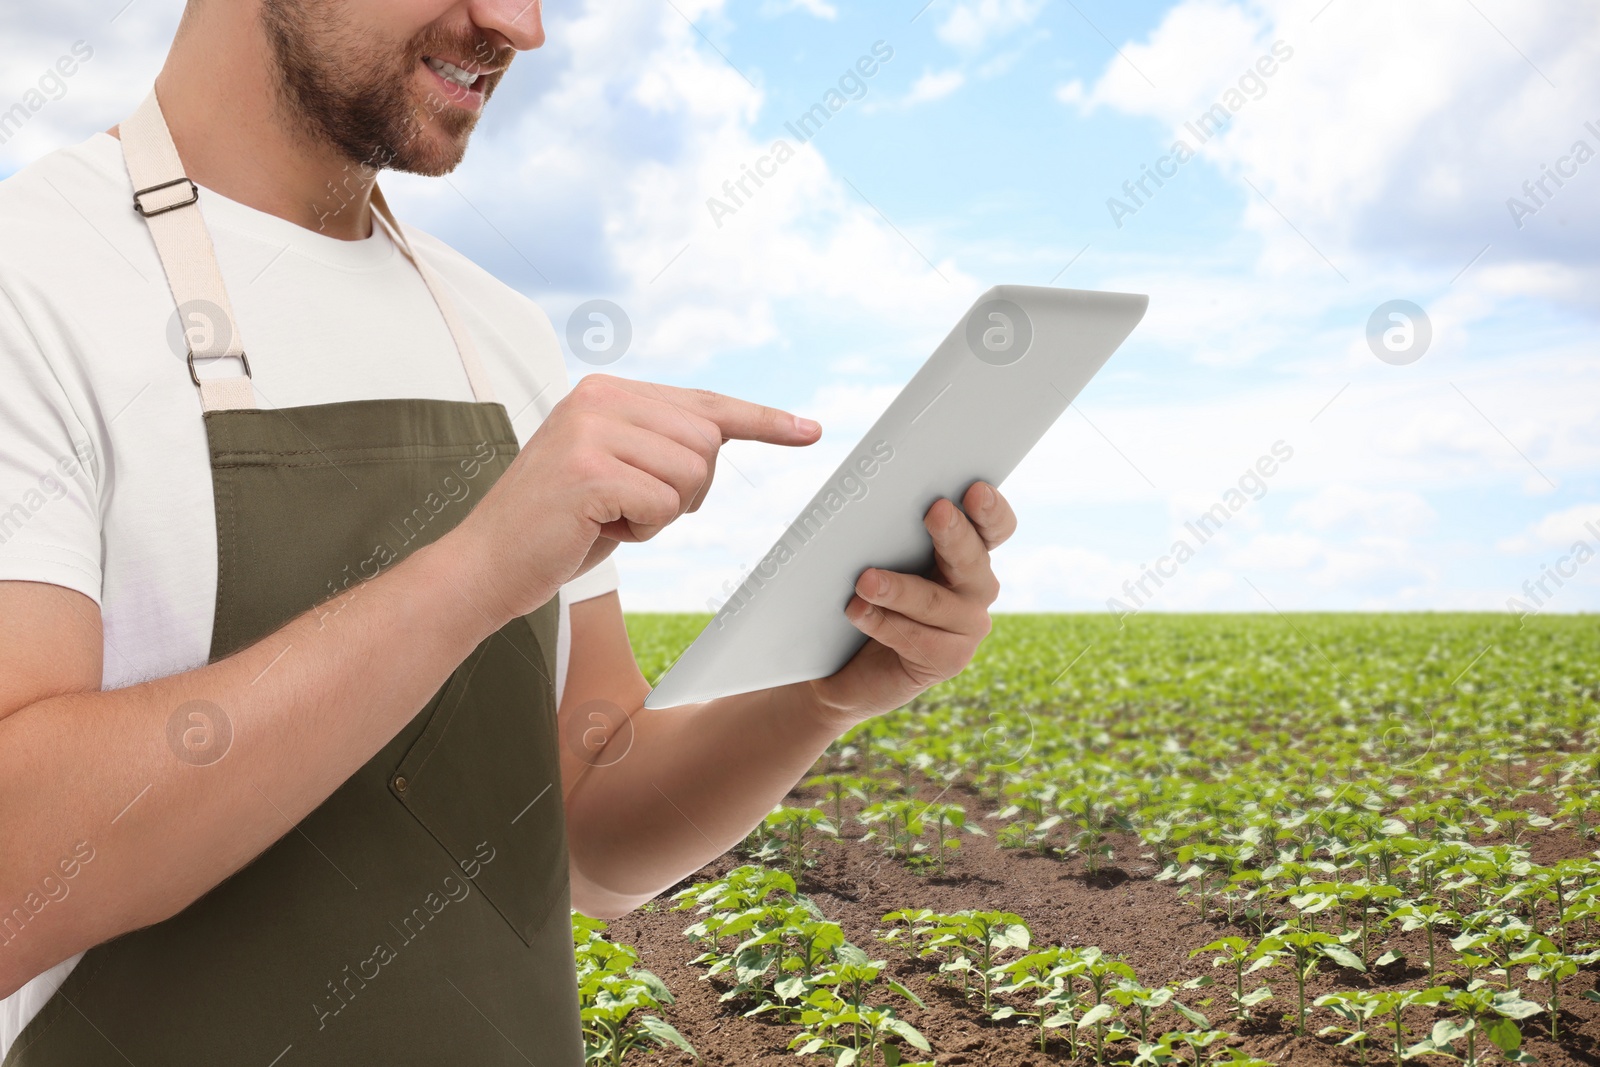 Image of Farmer with tablet computer in field, closeup. Harvesting season